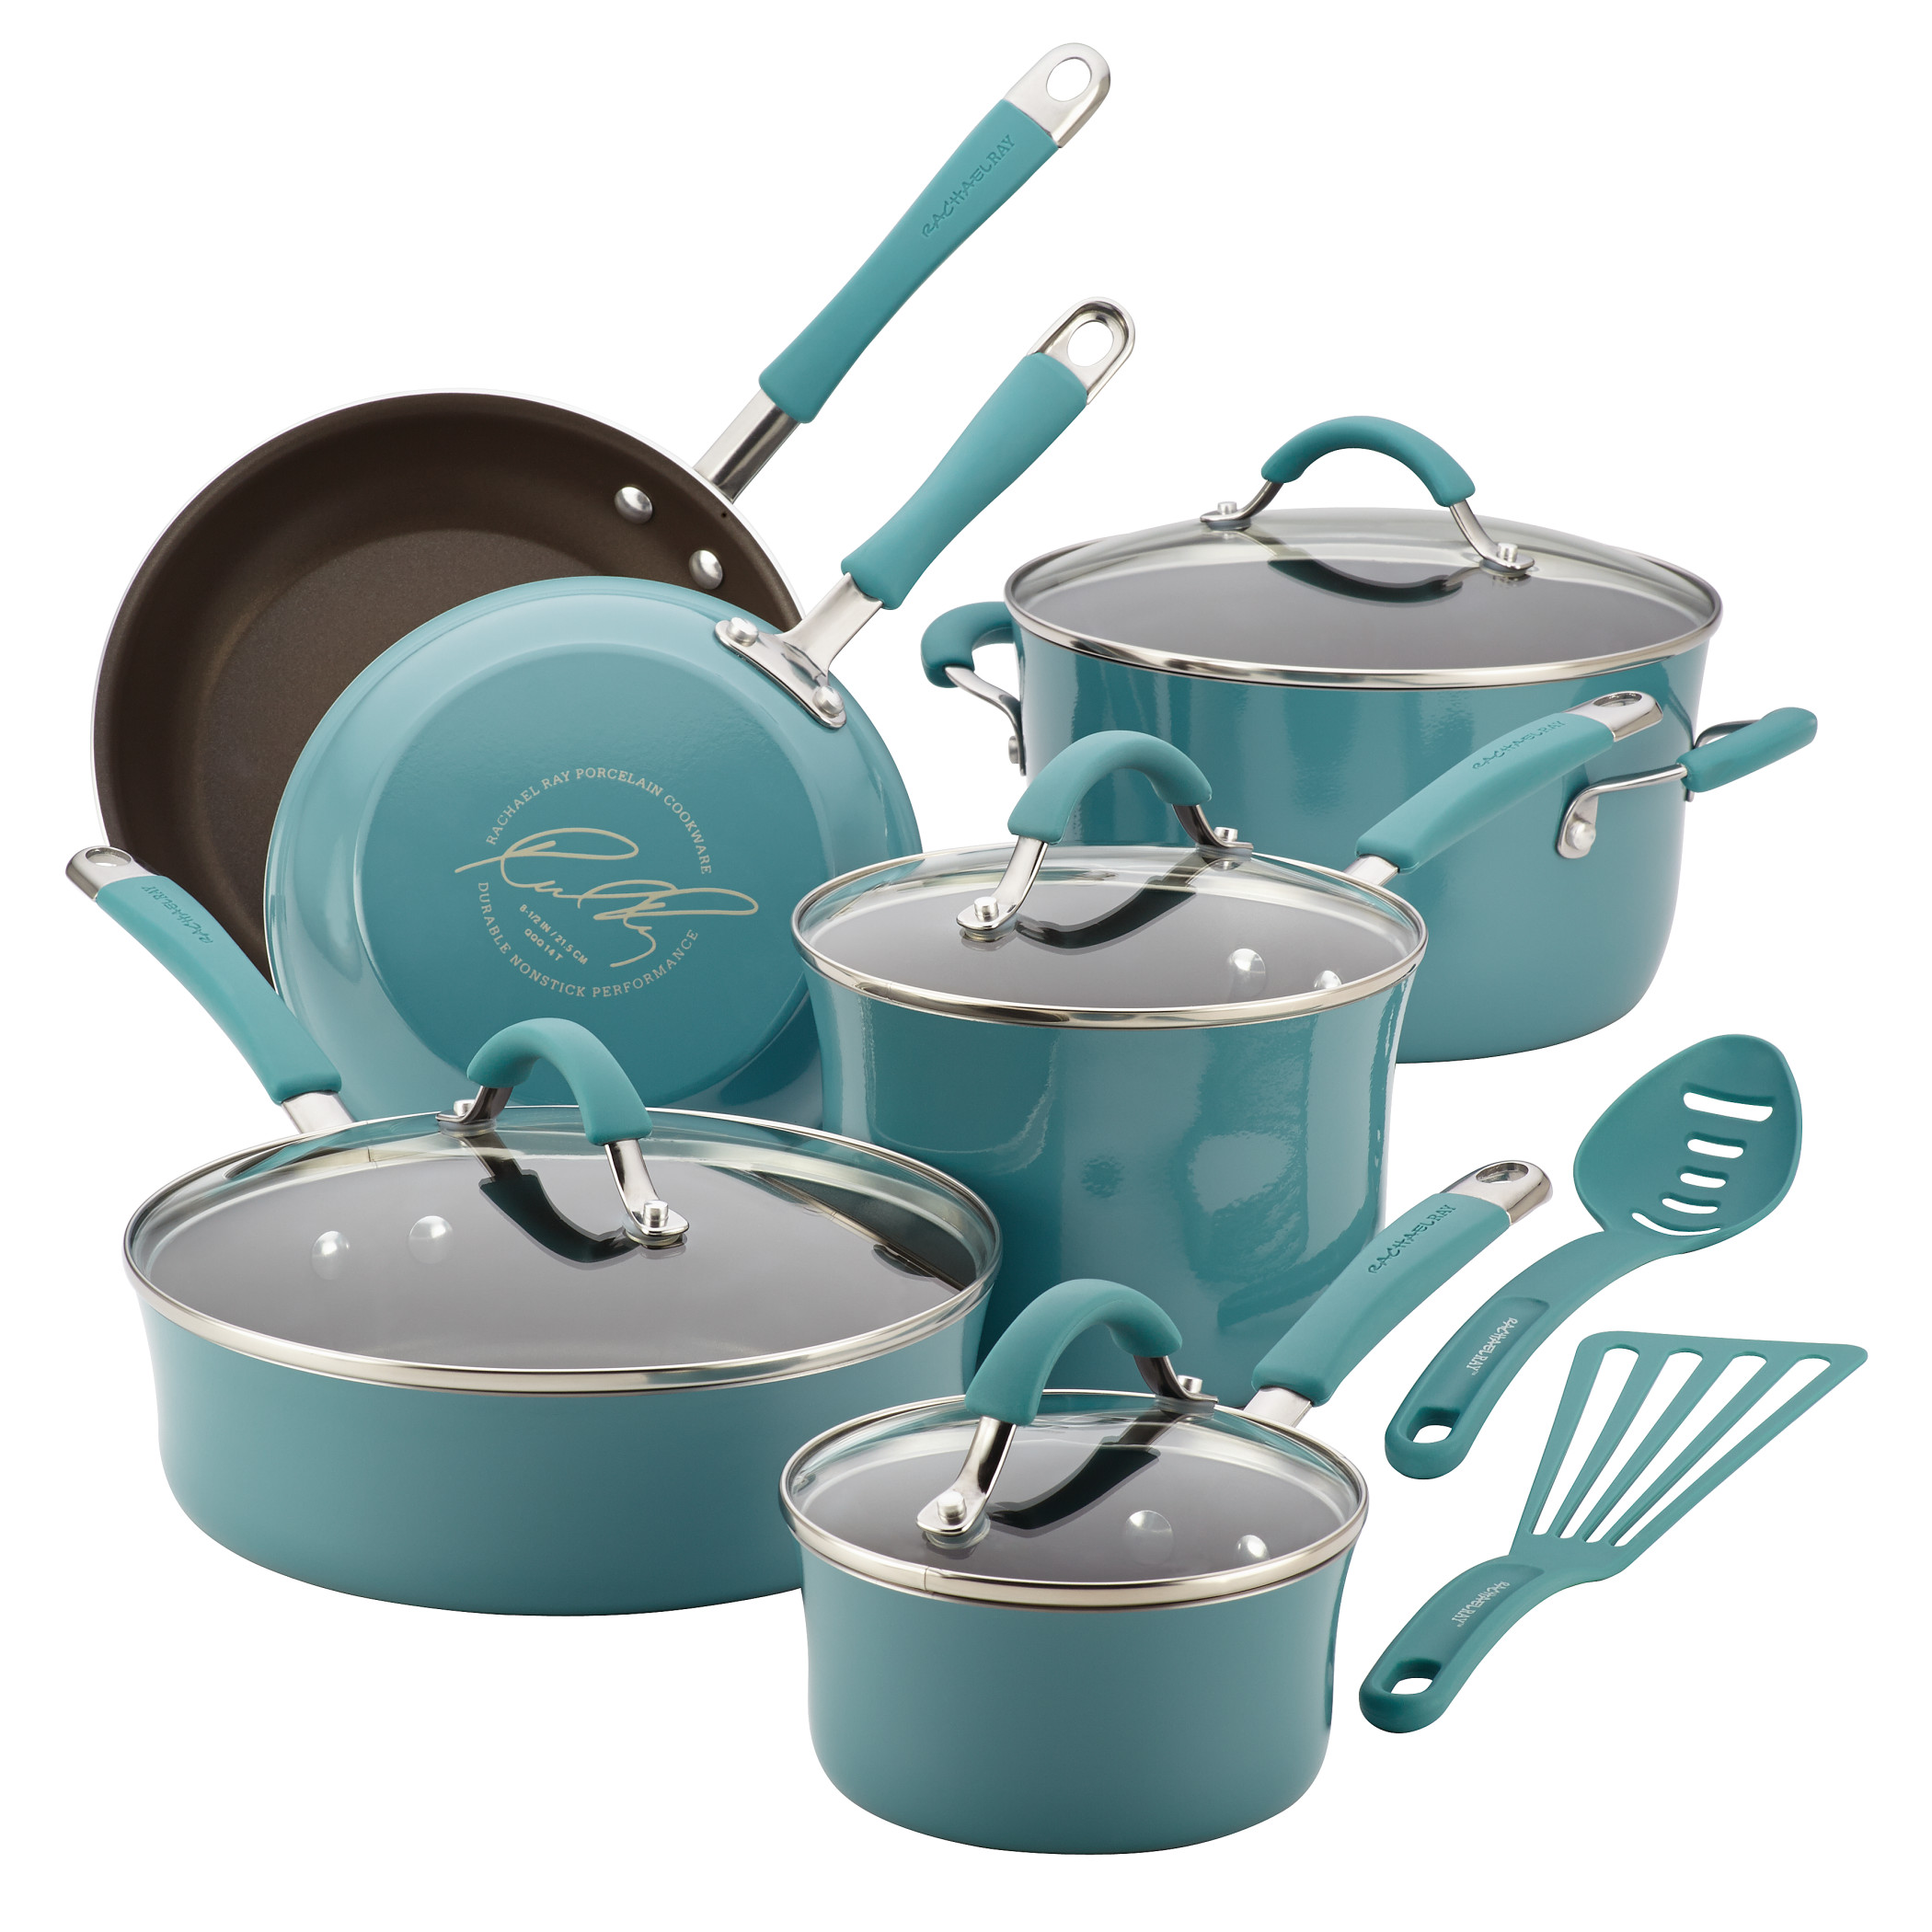 Rachael Ray Cucina 12 Piece Hard Porcelain Enamel Nonstick Pots and Pans Set, Agave Blue - image 1 of 7